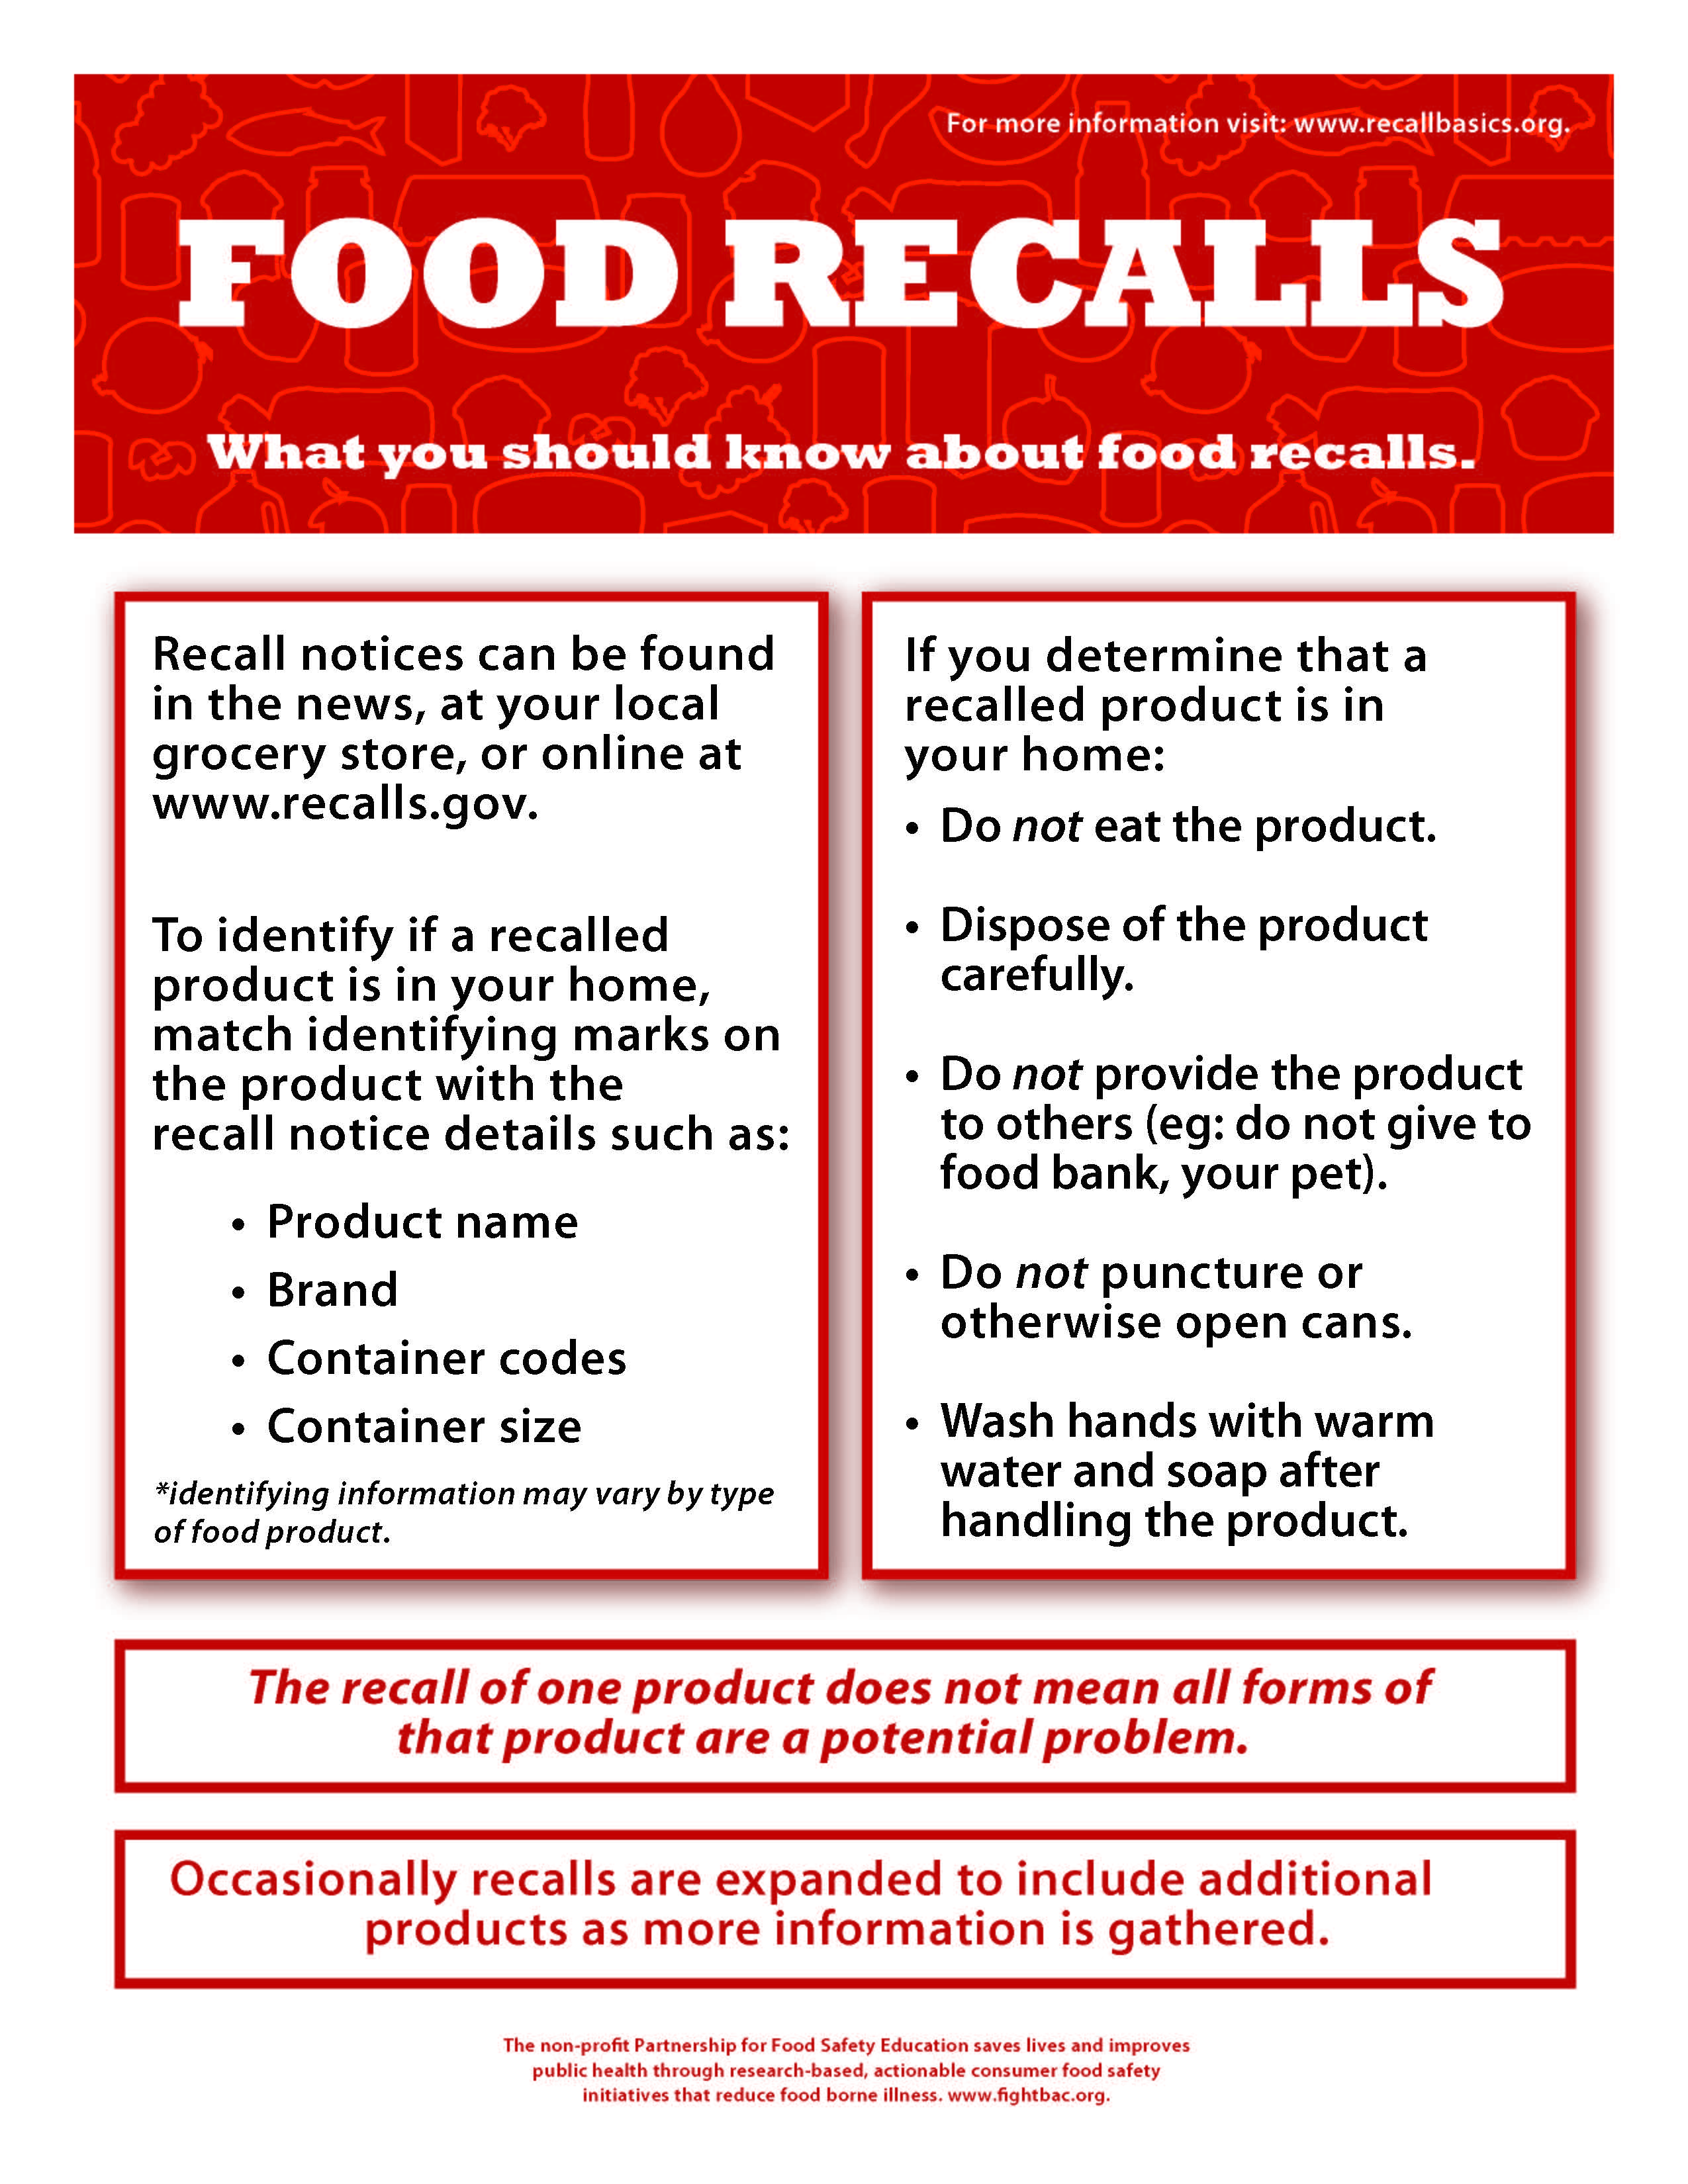 Food recalls what should you know